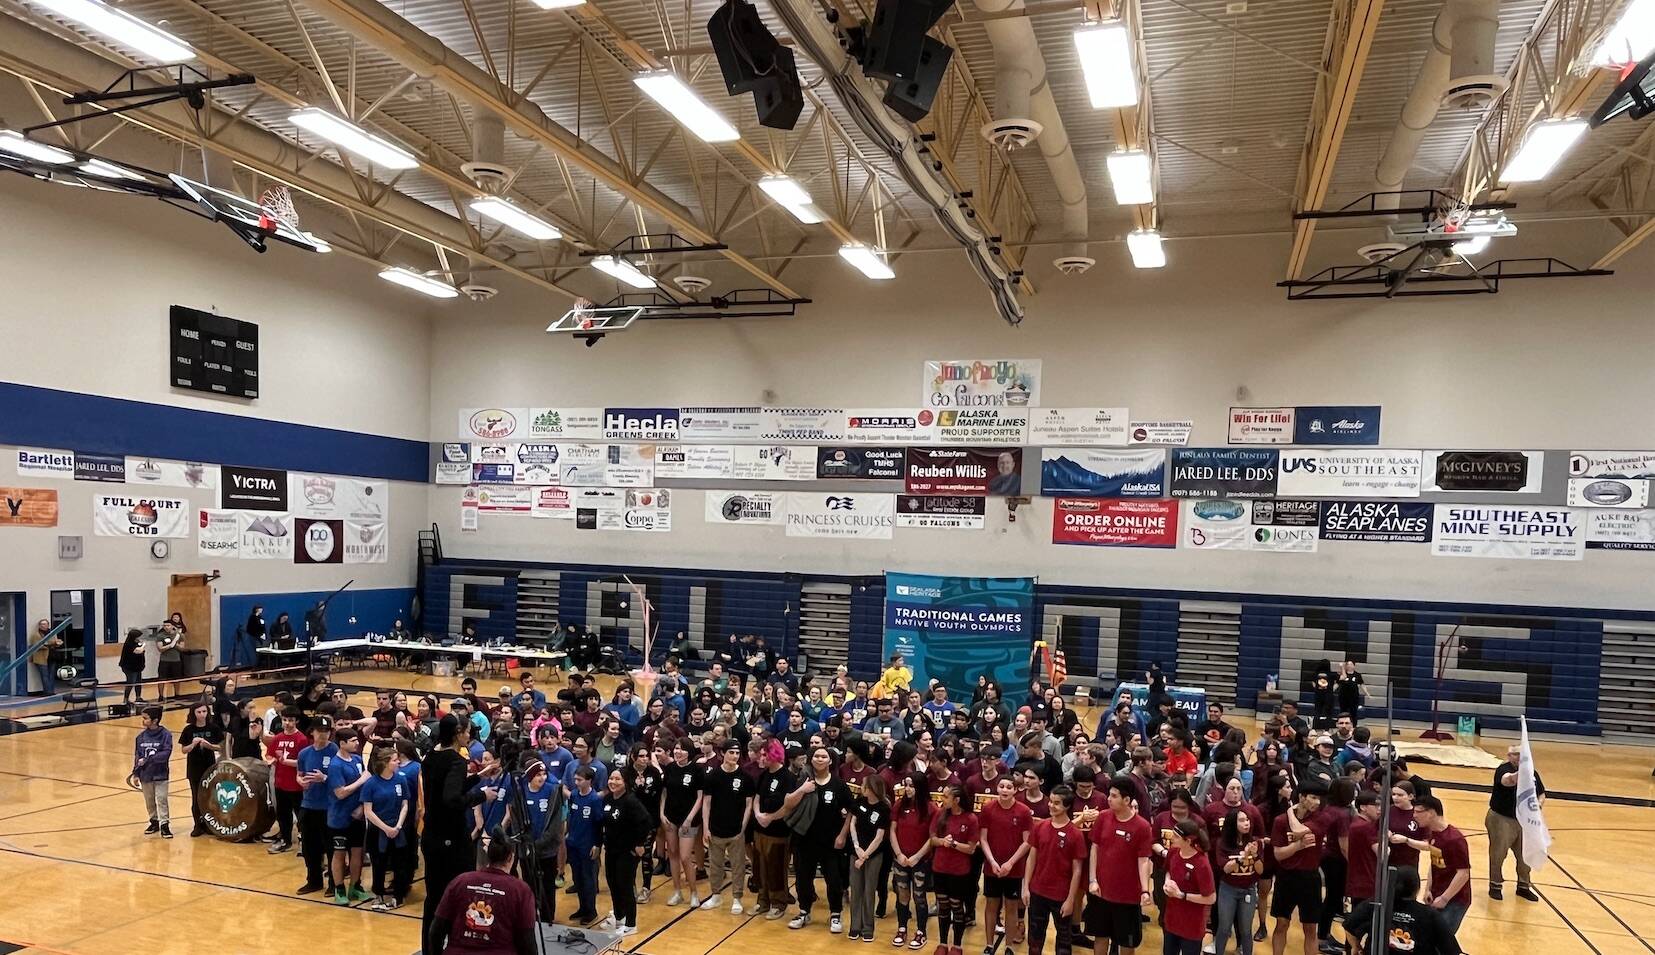 A record-breaking number of athletes from local and visiting teams gather in the gymnasium at Thunder Mountain High School on Saturday to take part in this year’s annual Traditional Games. (Jonson Kuhn / Juneau Empire)